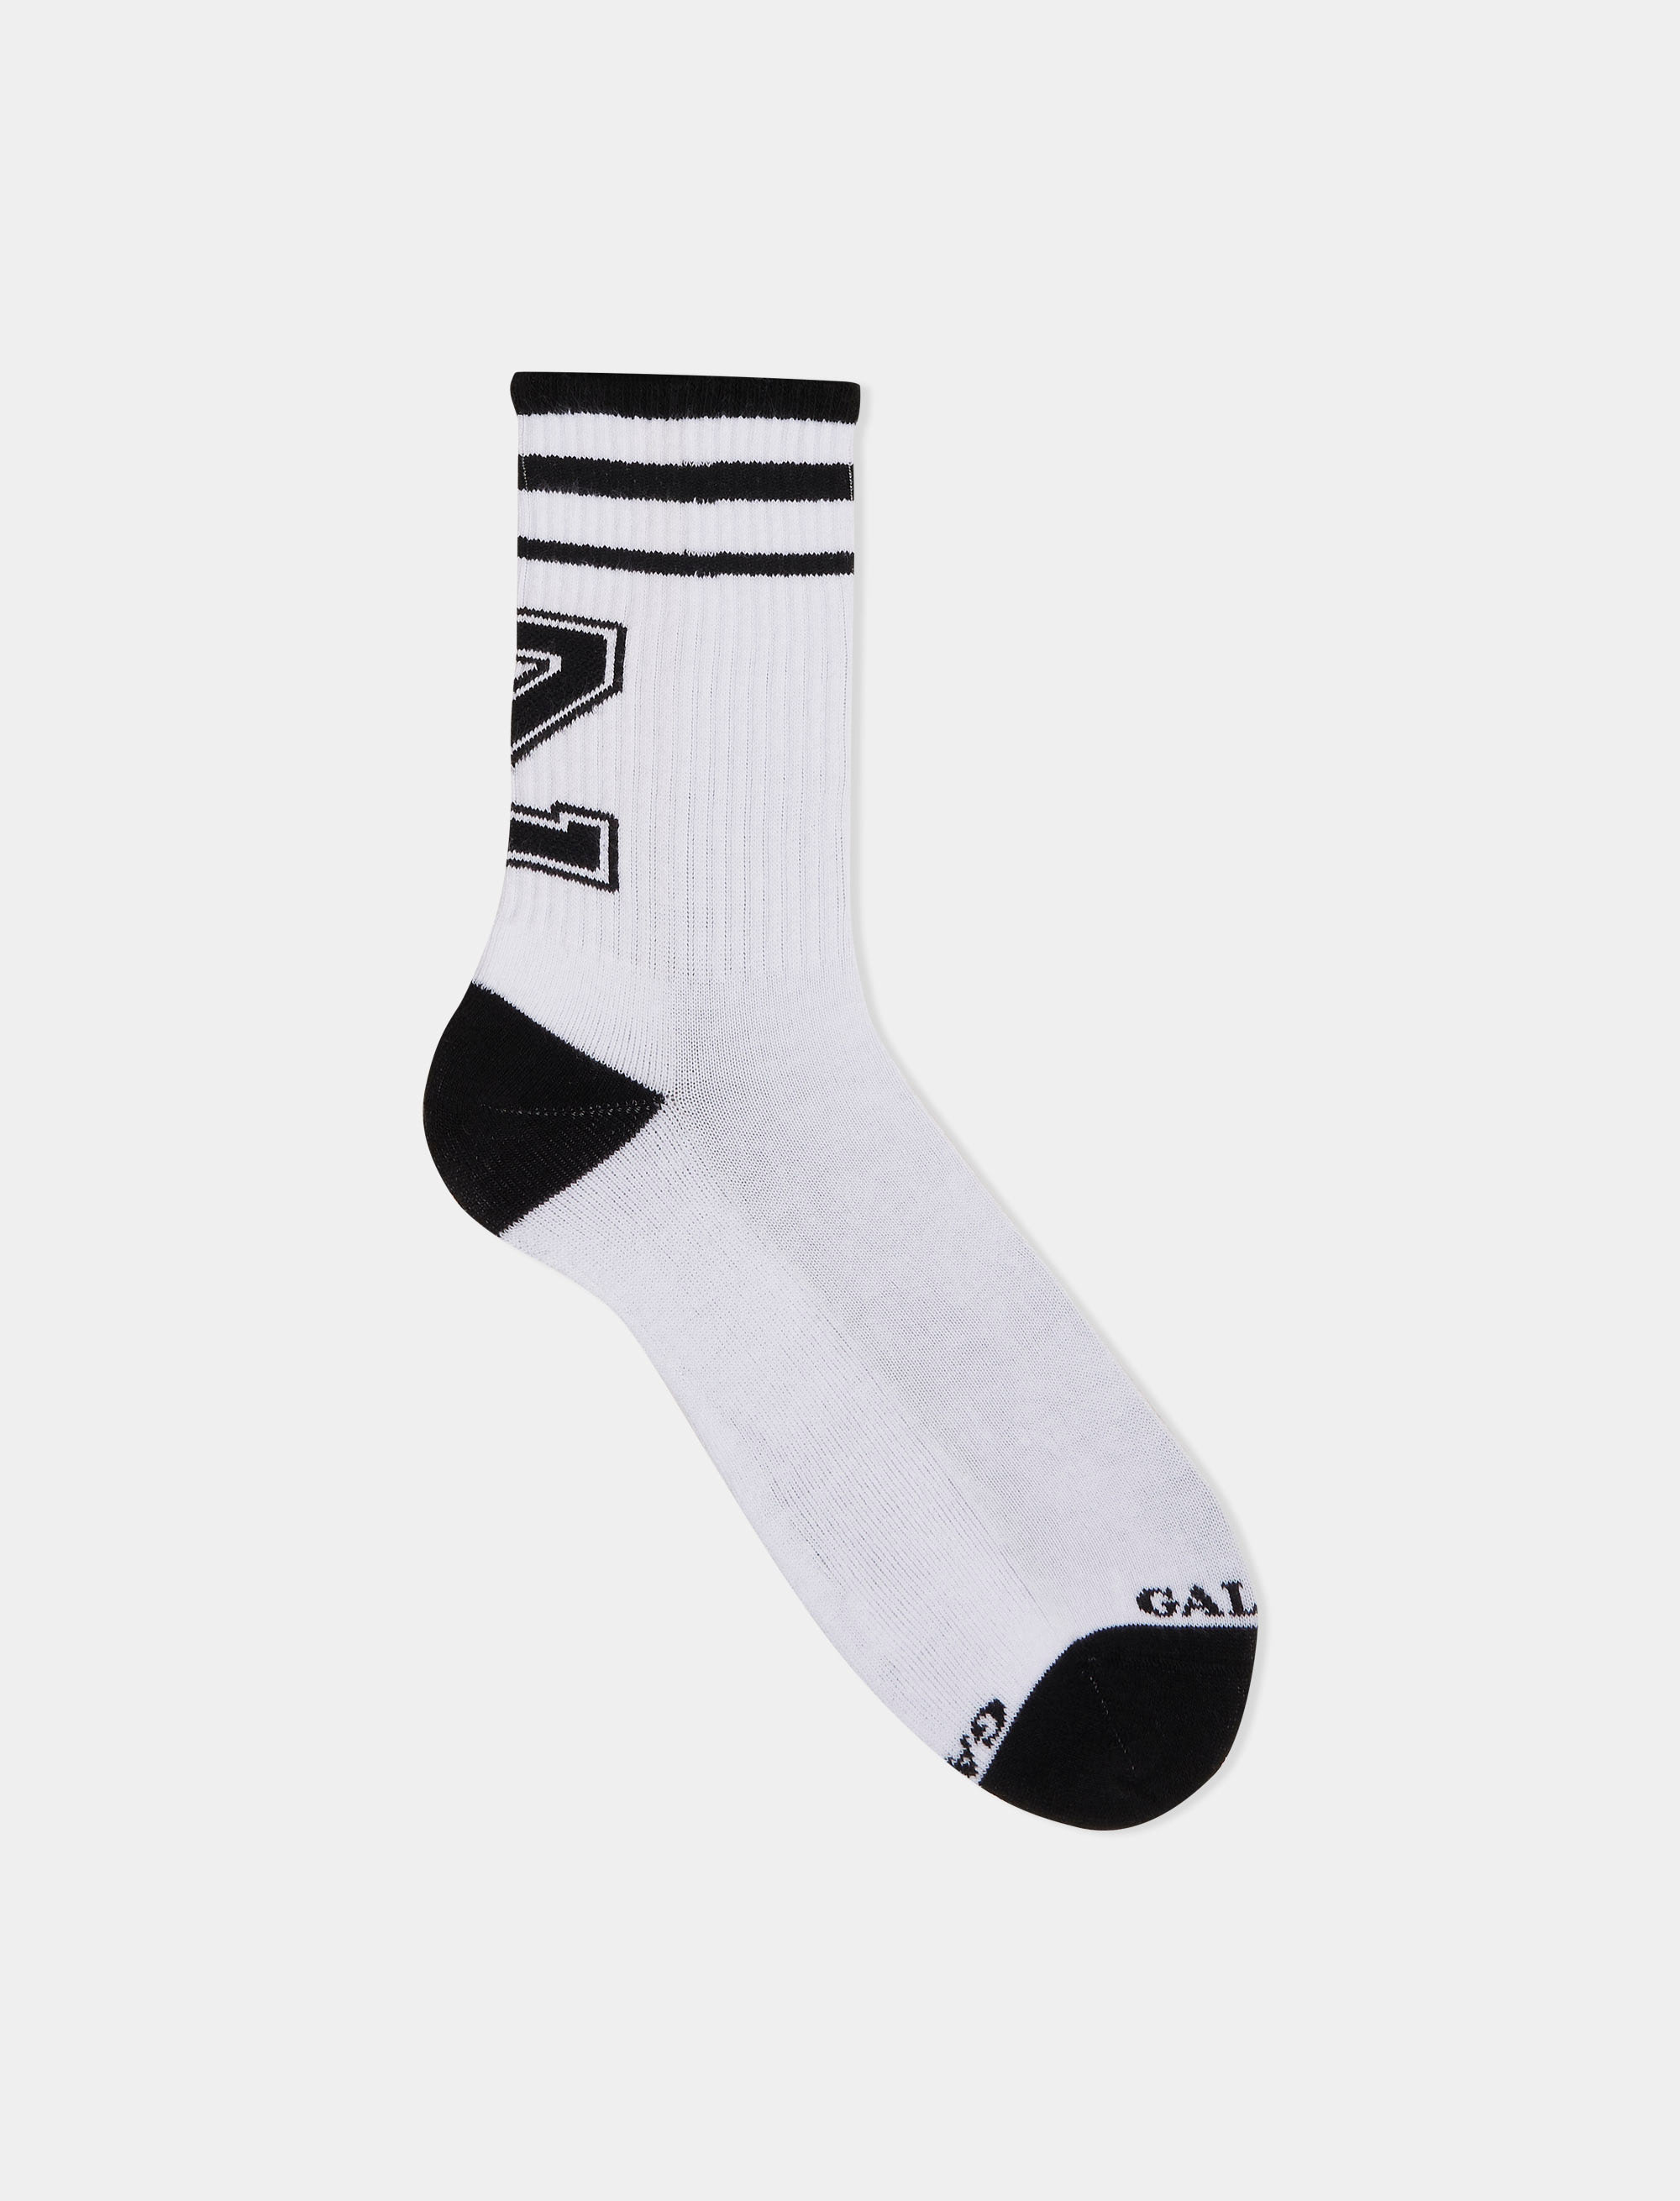 Unisex short sock in plain white cotton terry cloth with letter Z ...